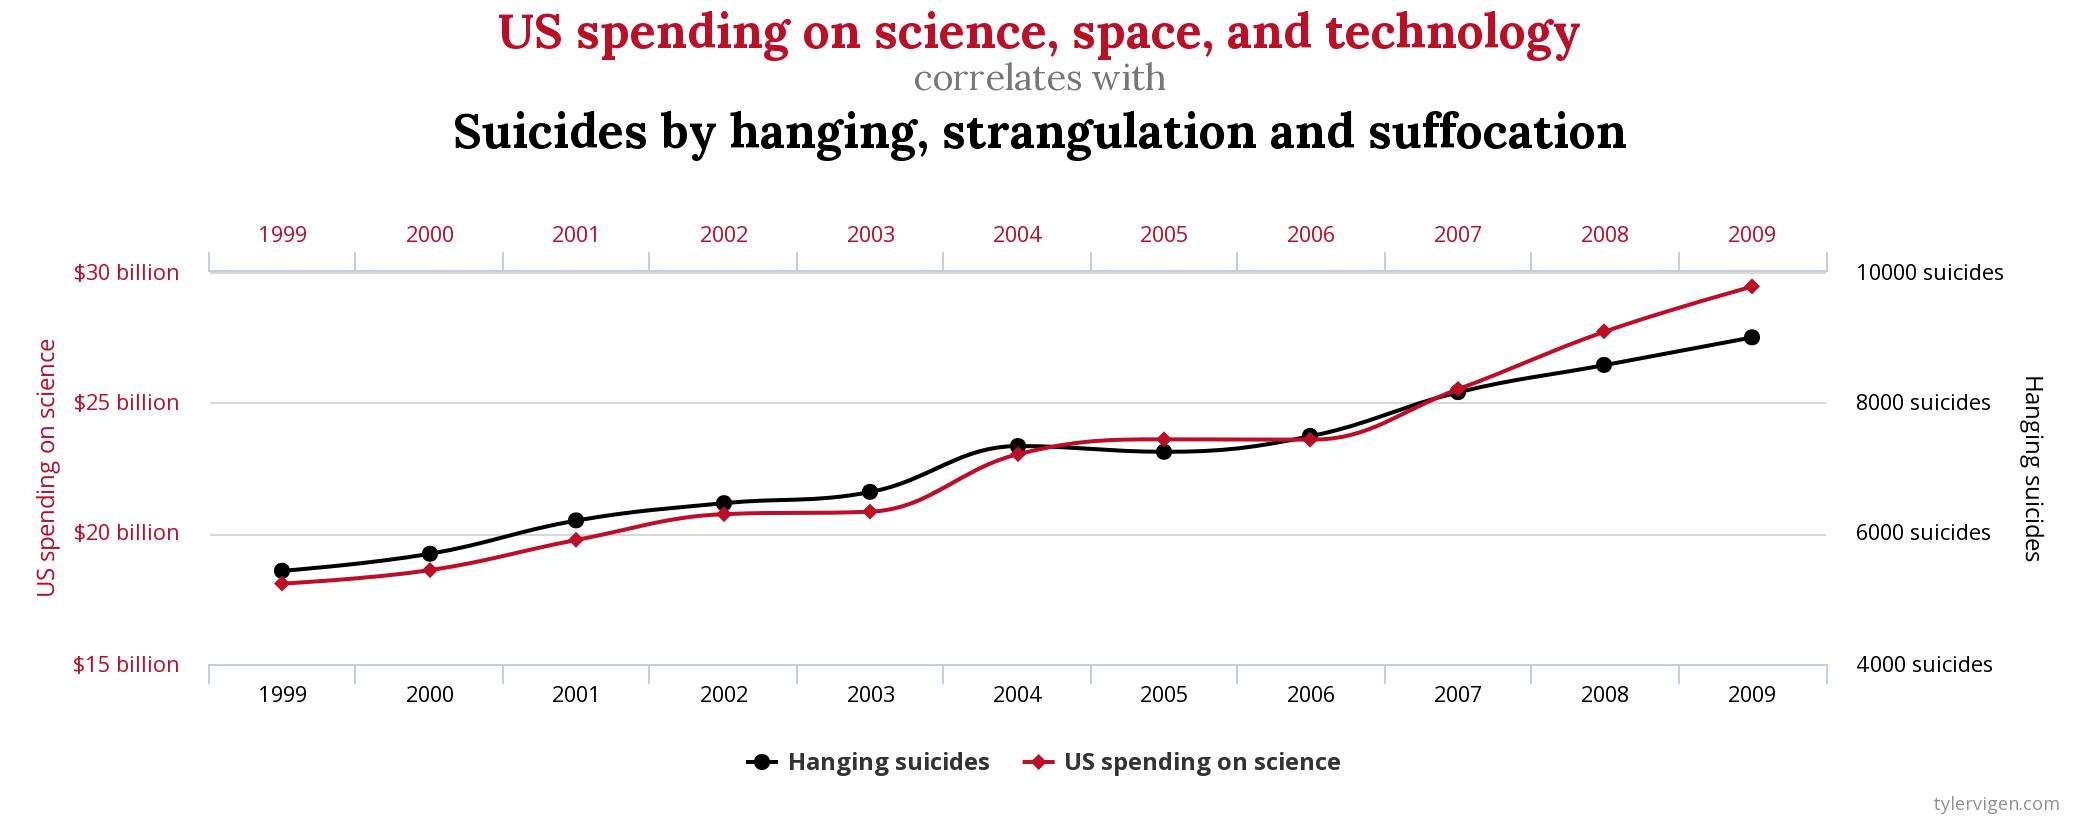 correlation of suicides with science spending